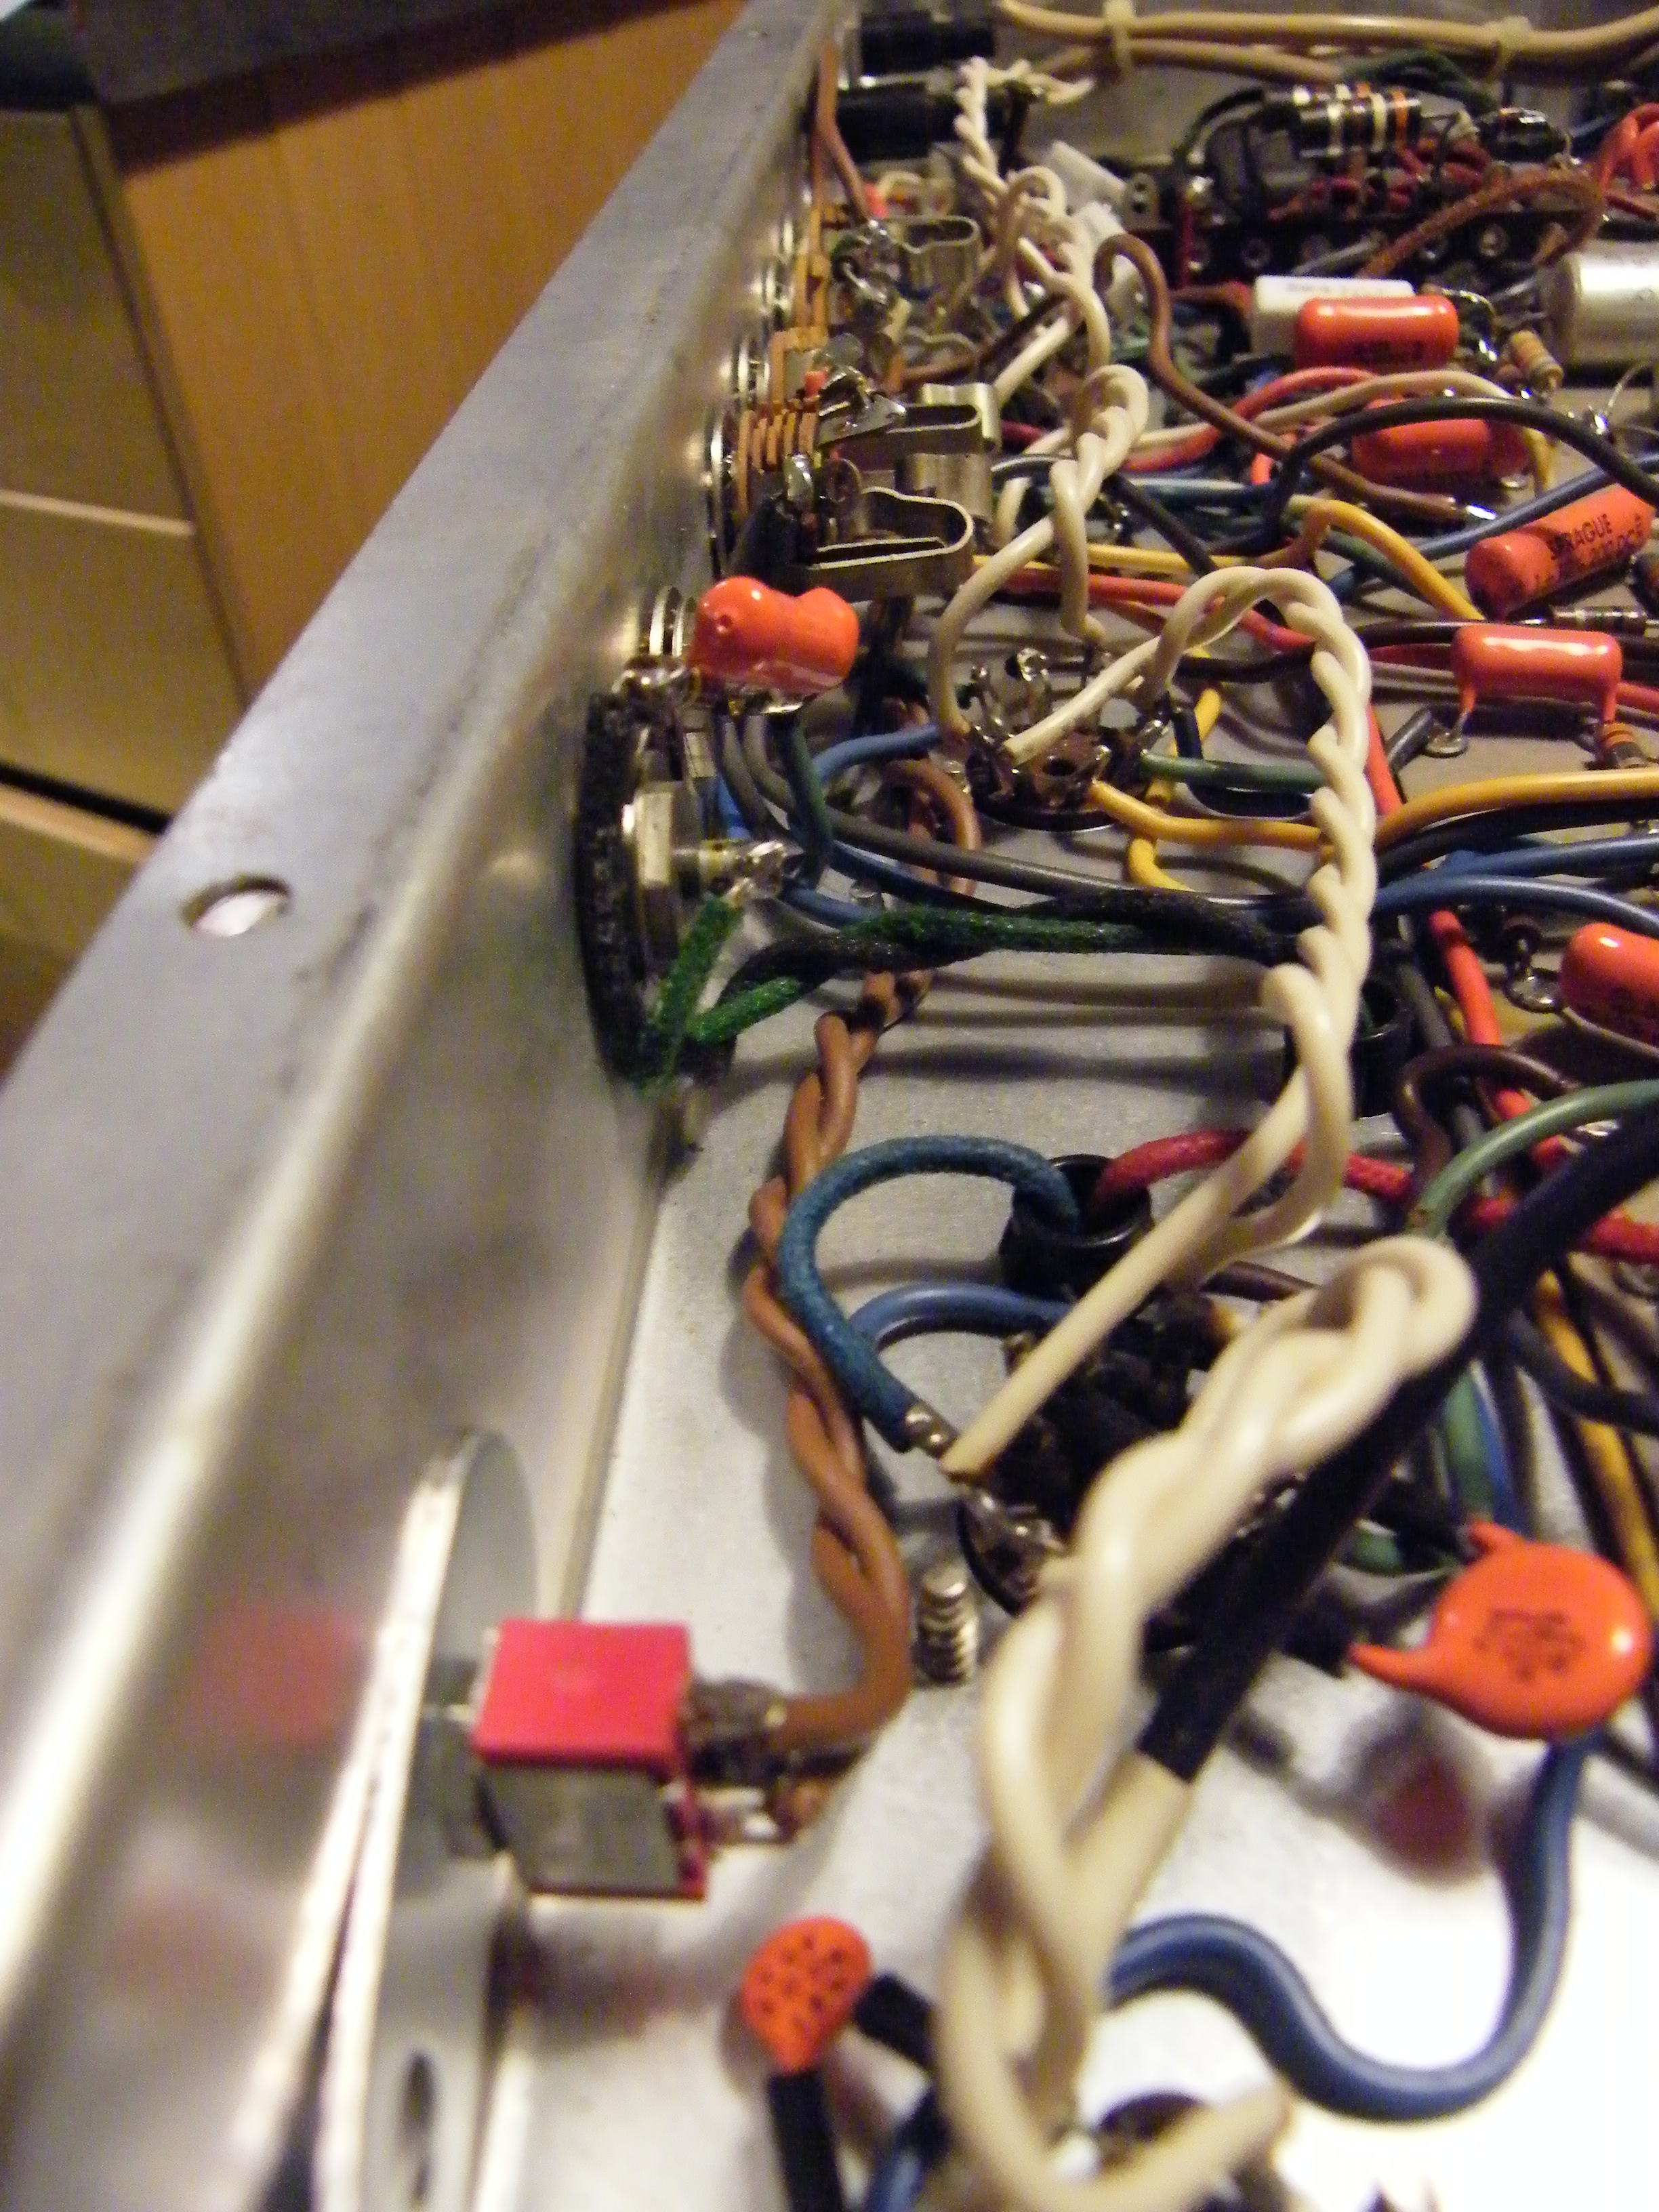 nfb
                          mod wire routing